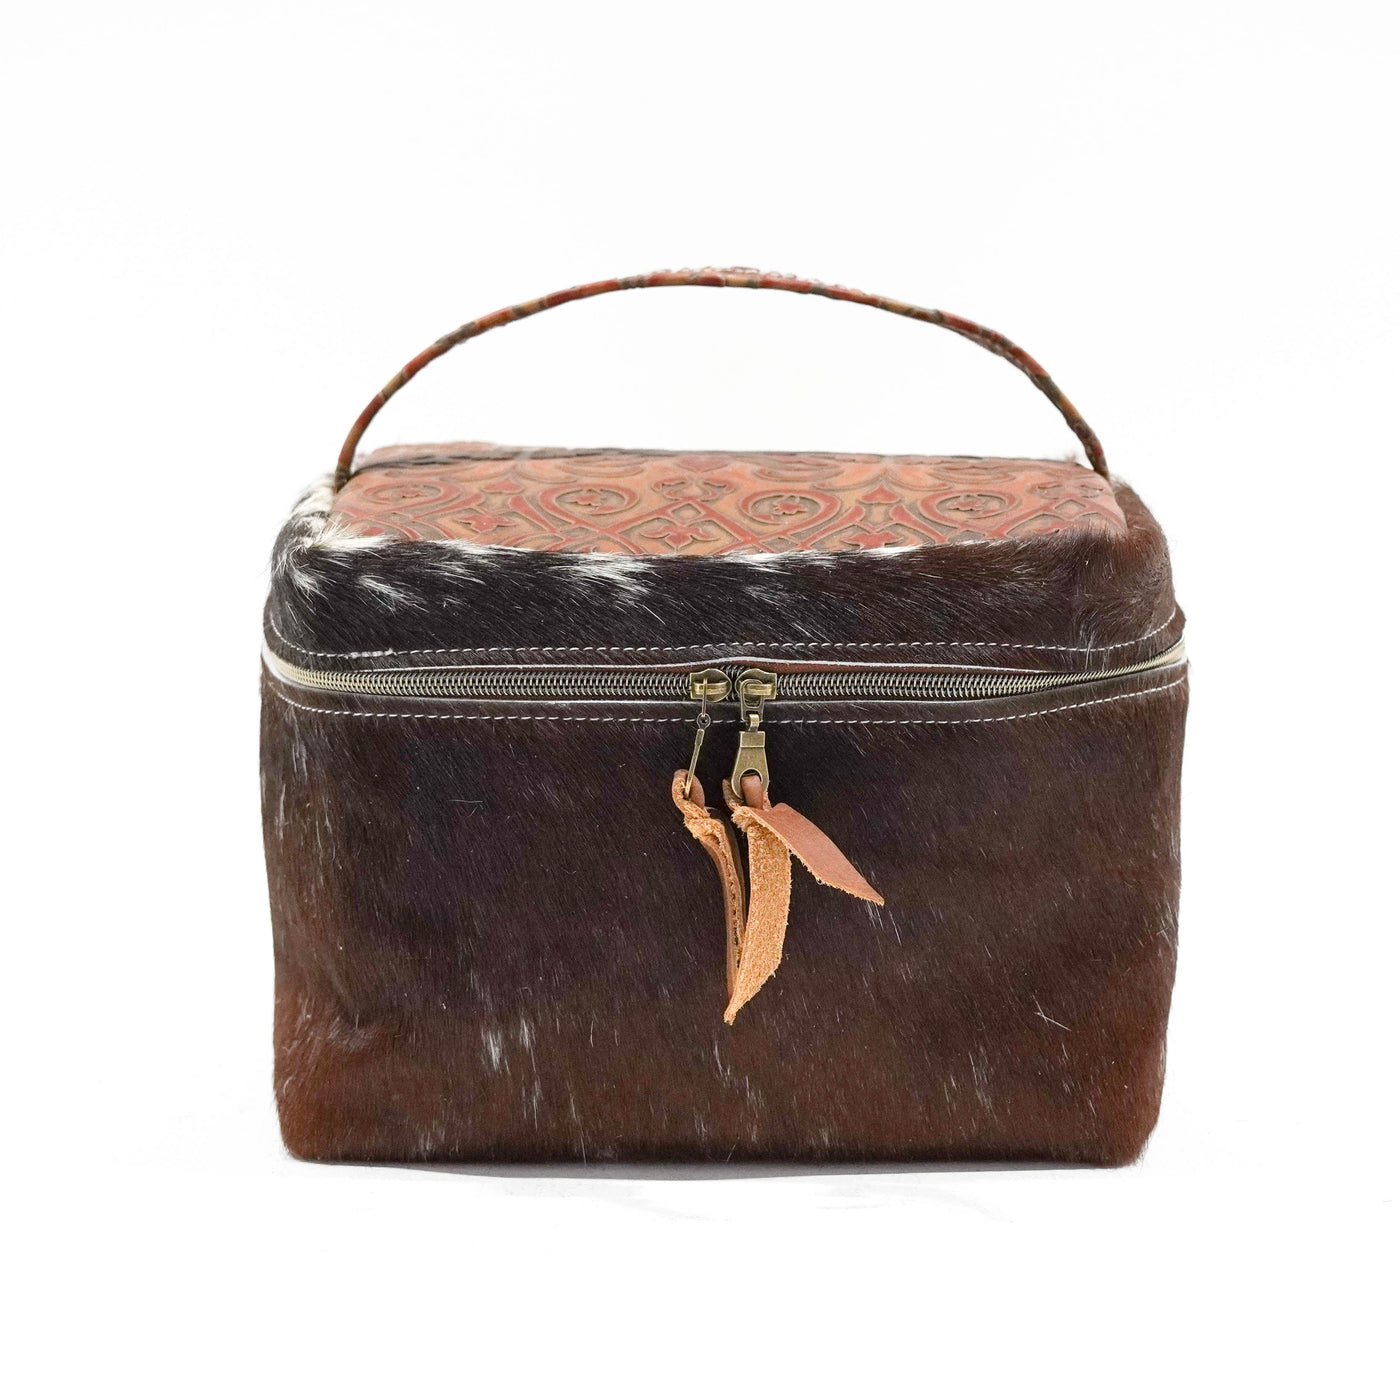 Train Station - Longhorn w/ Caramel Black Jack-Train Station-Western-Cowhide-Bags-Handmade-Products-Gifts-Dancing Cactus Designs